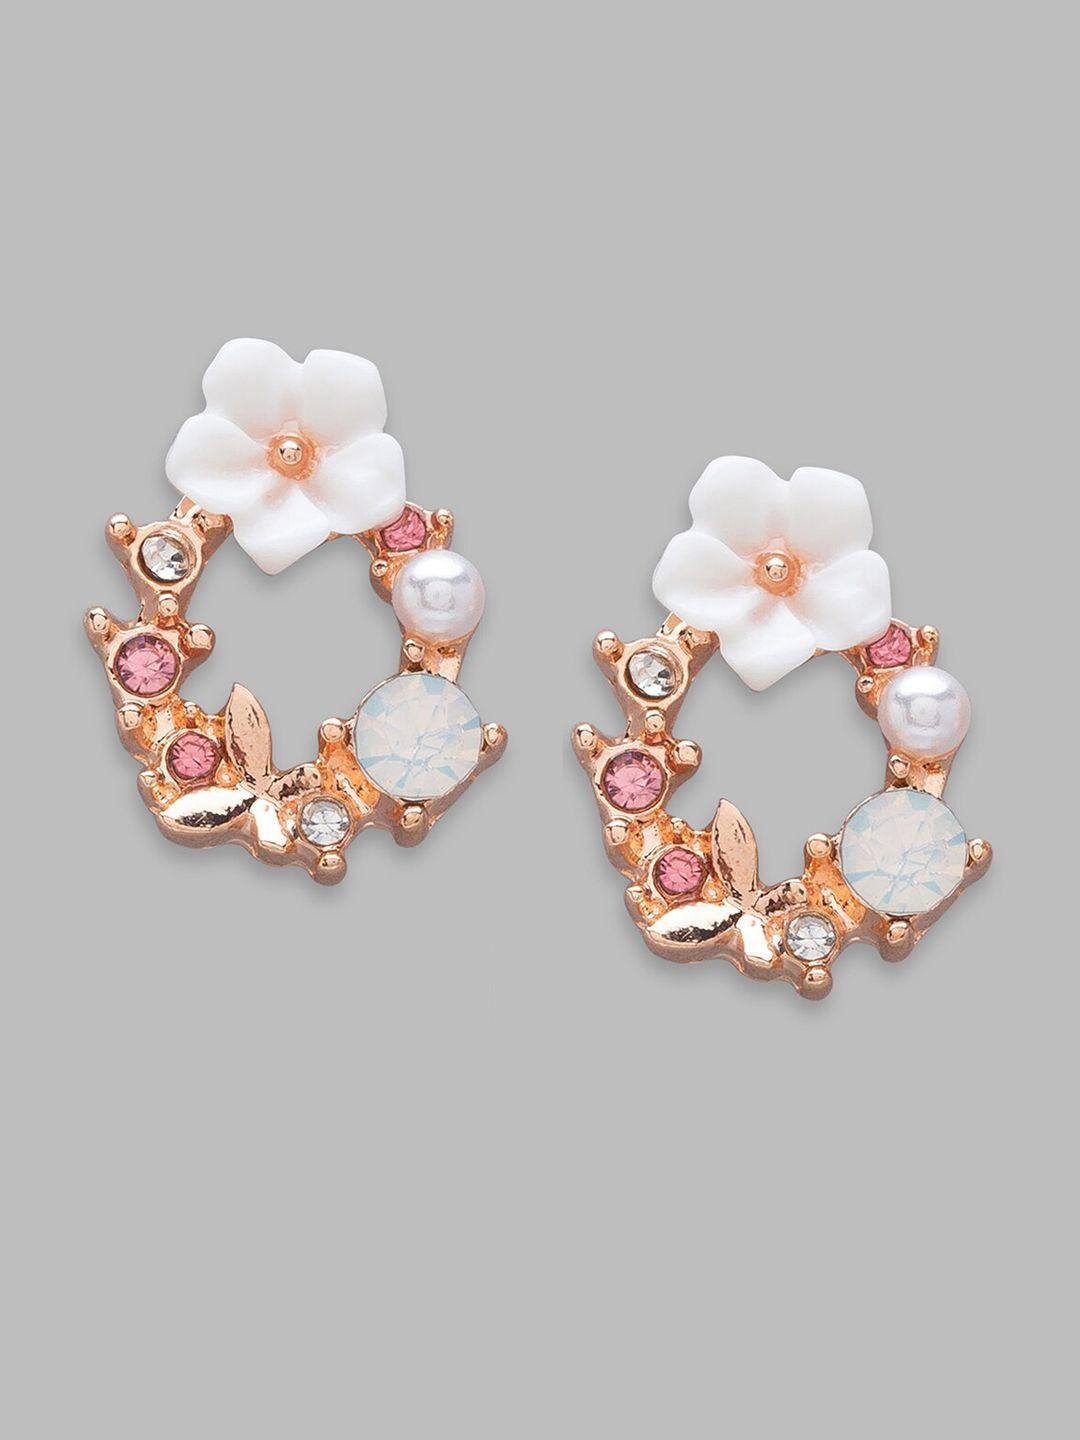 globus white & rose gold-plated floral studs earrings